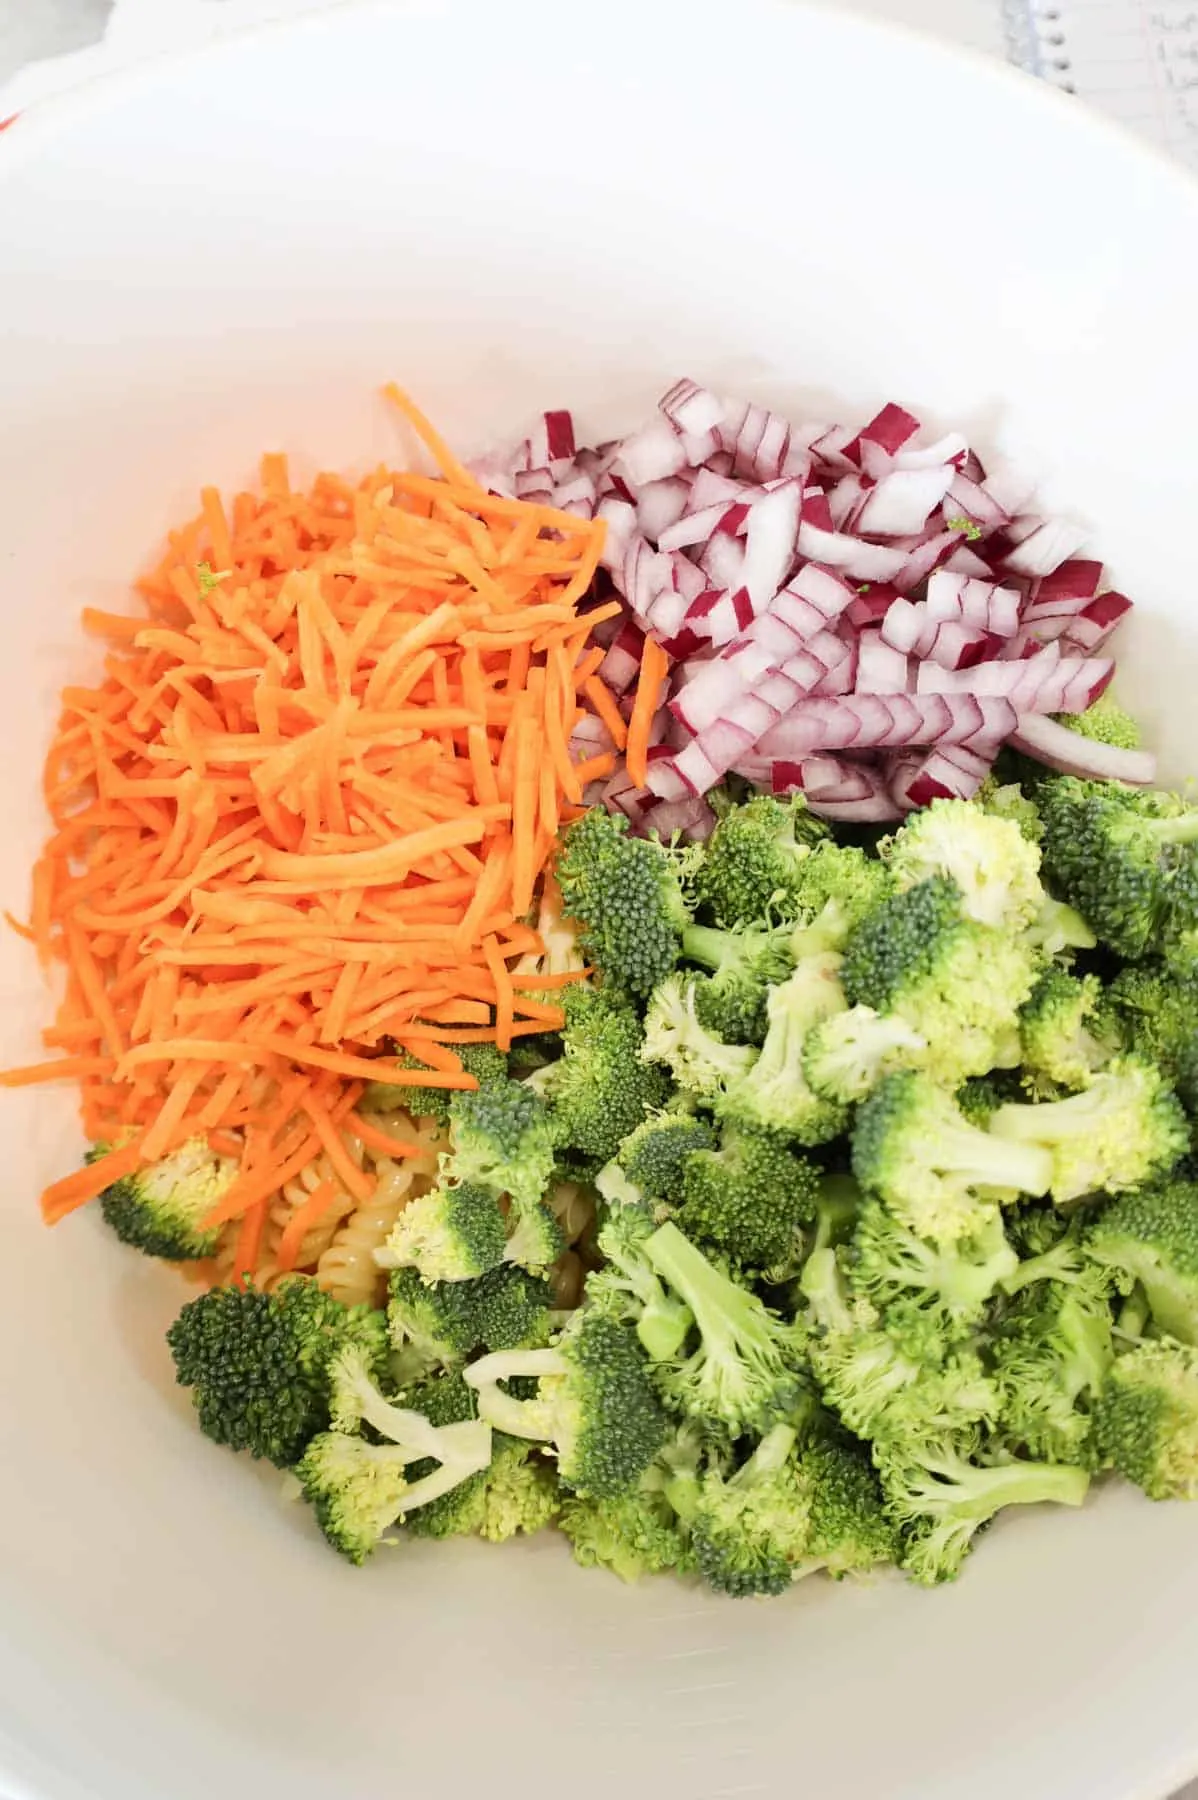 shredded carrots, diced red onions and chopped broccoli florets in a mixing bowl